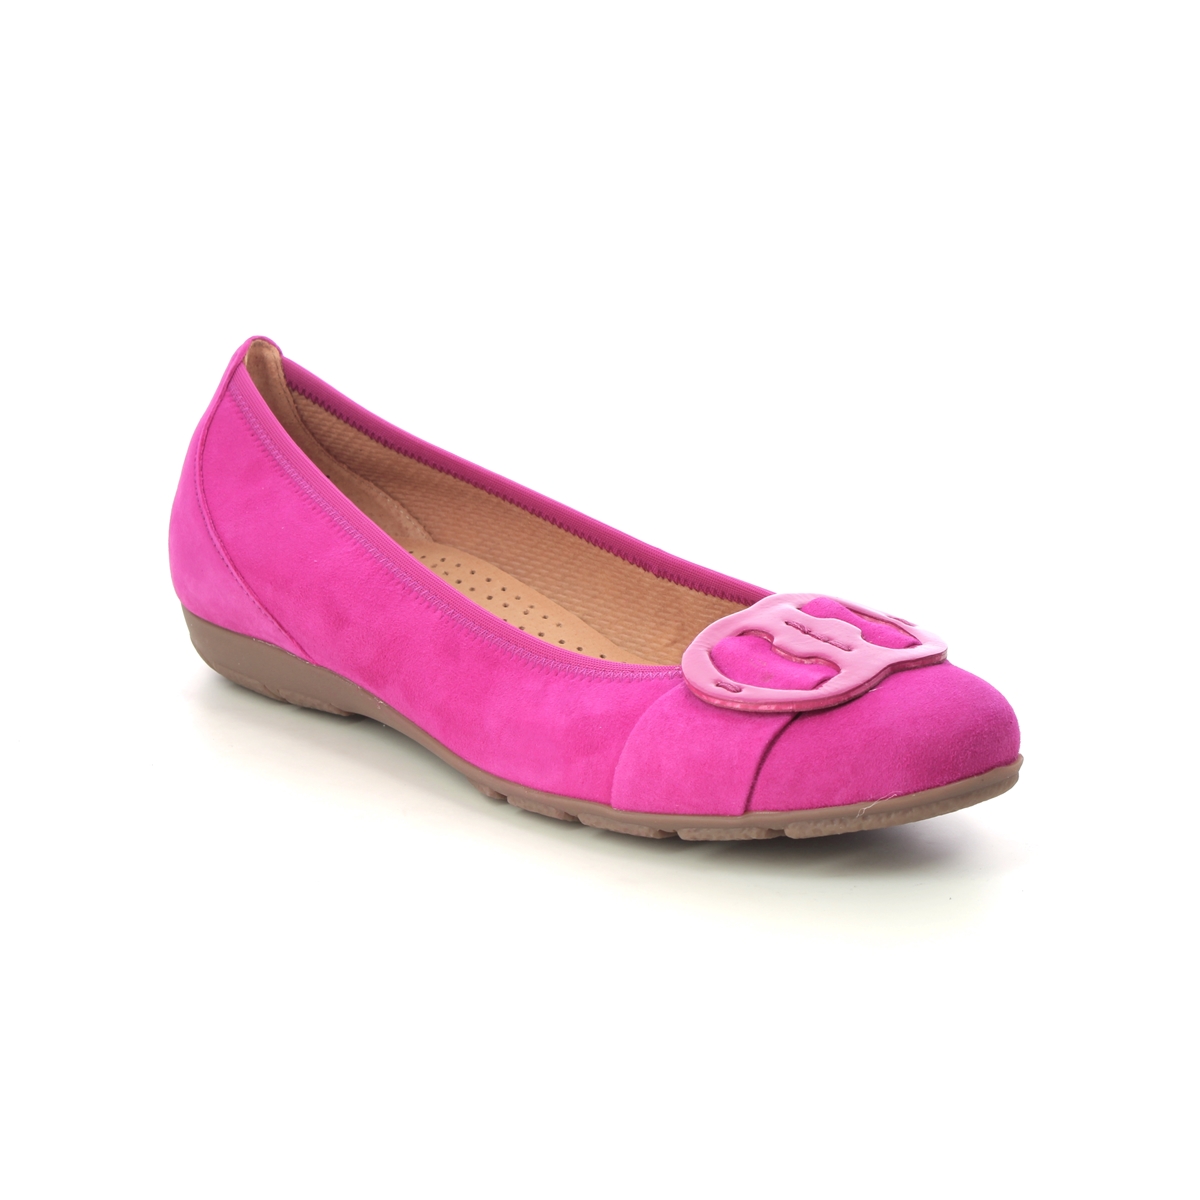 Gabor Rosta Hovercraft Fuchsia Suede Womens pumps 44.163.10 in a Plain Leather in Size 4.5